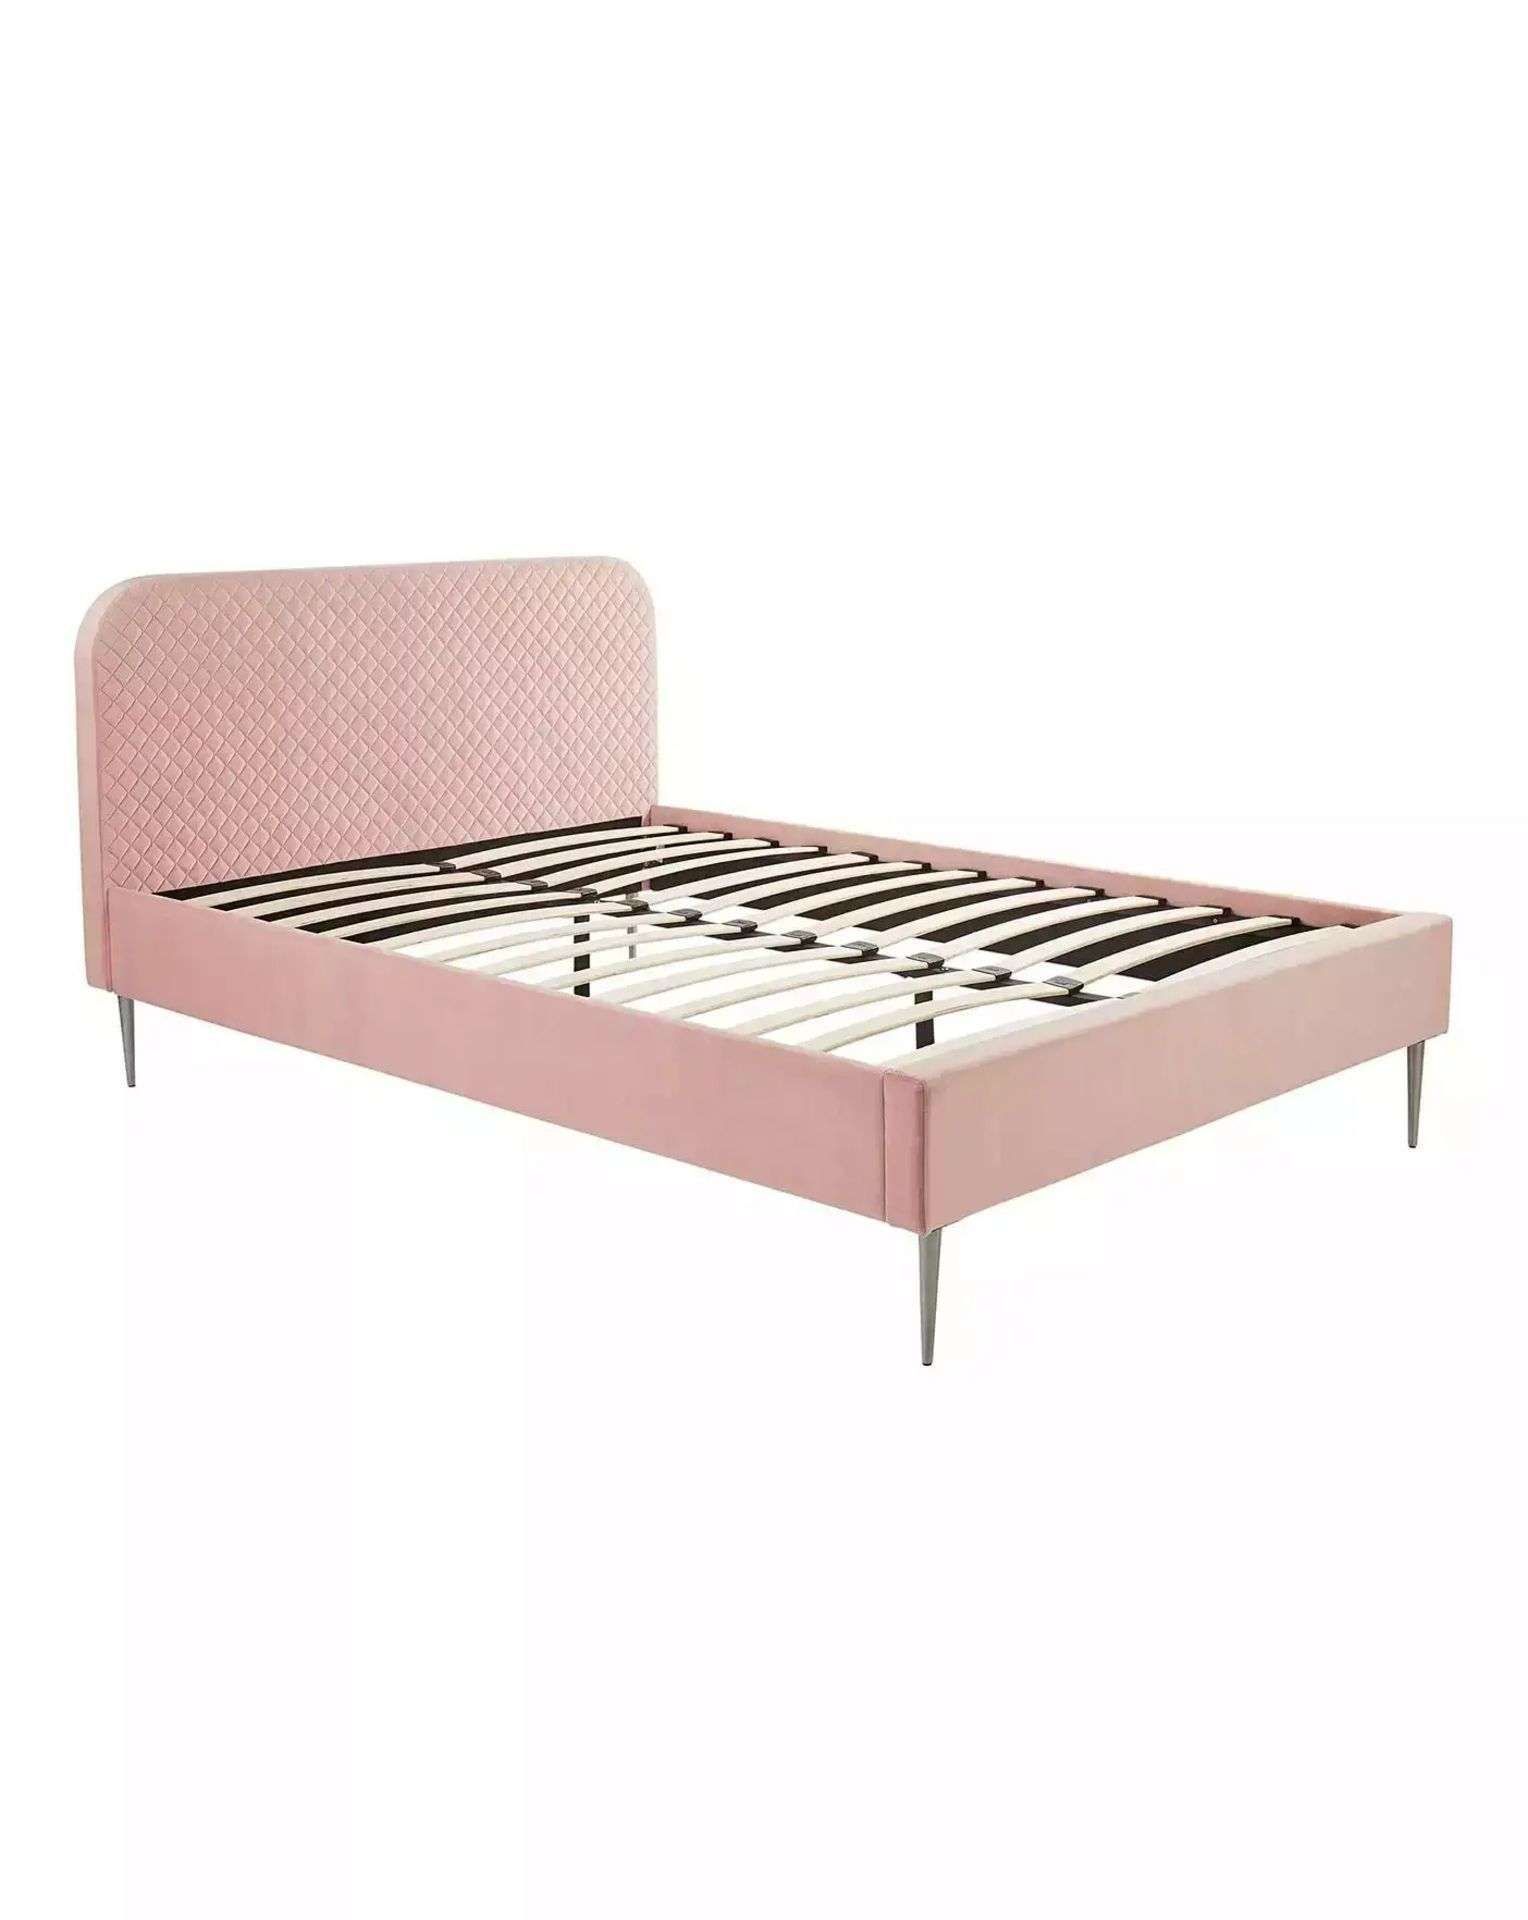 BRAND NEW ARDEN Quilted DOUBLE Bed Frame. PEWTER. RRP £339 EACH. The Arden Quilted Bed is the - Image 2 of 2